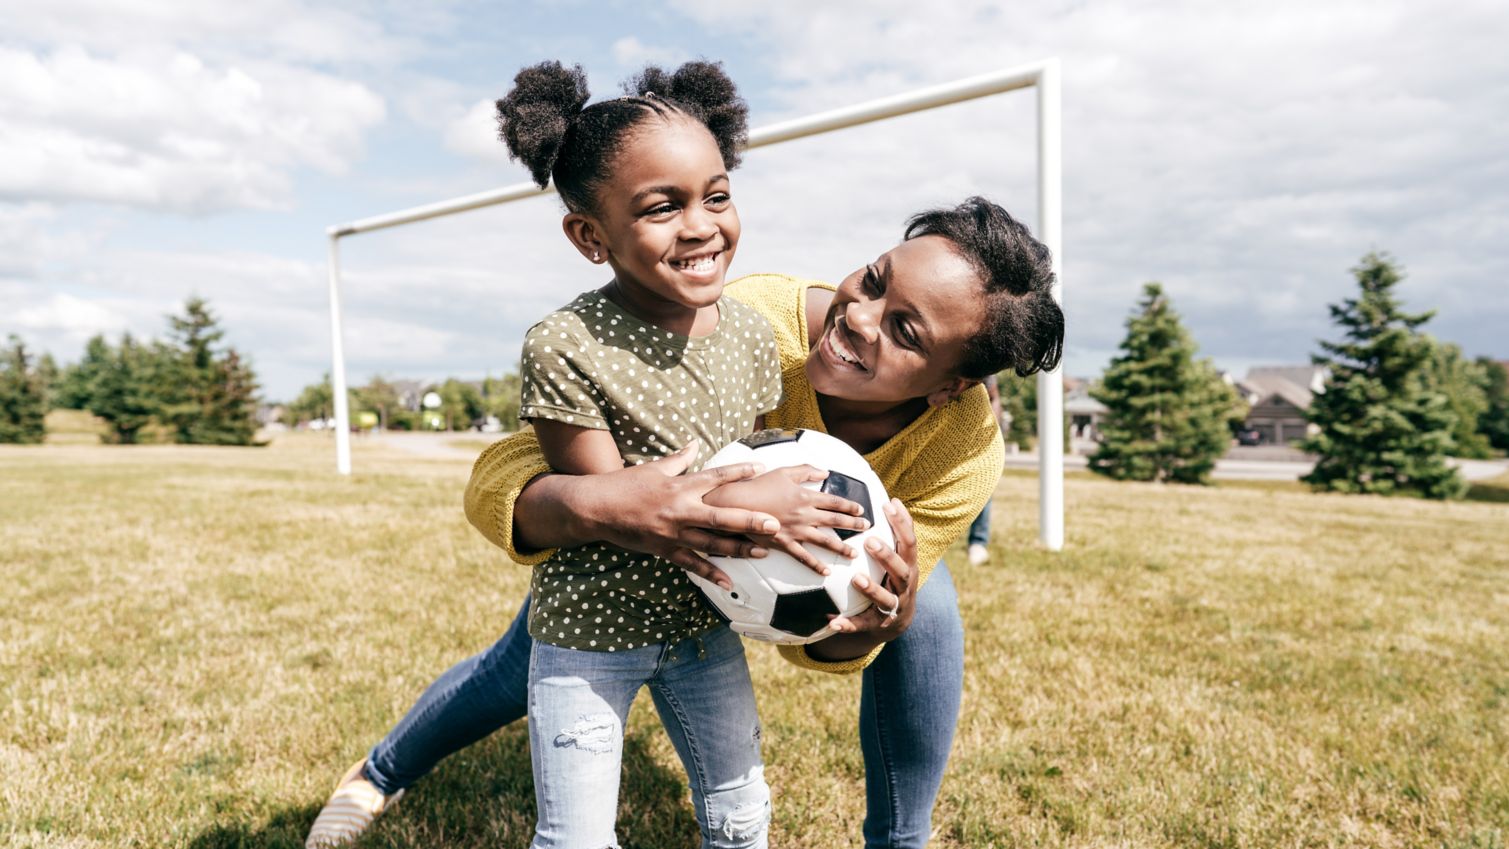 Mom and daughter play soccer outside